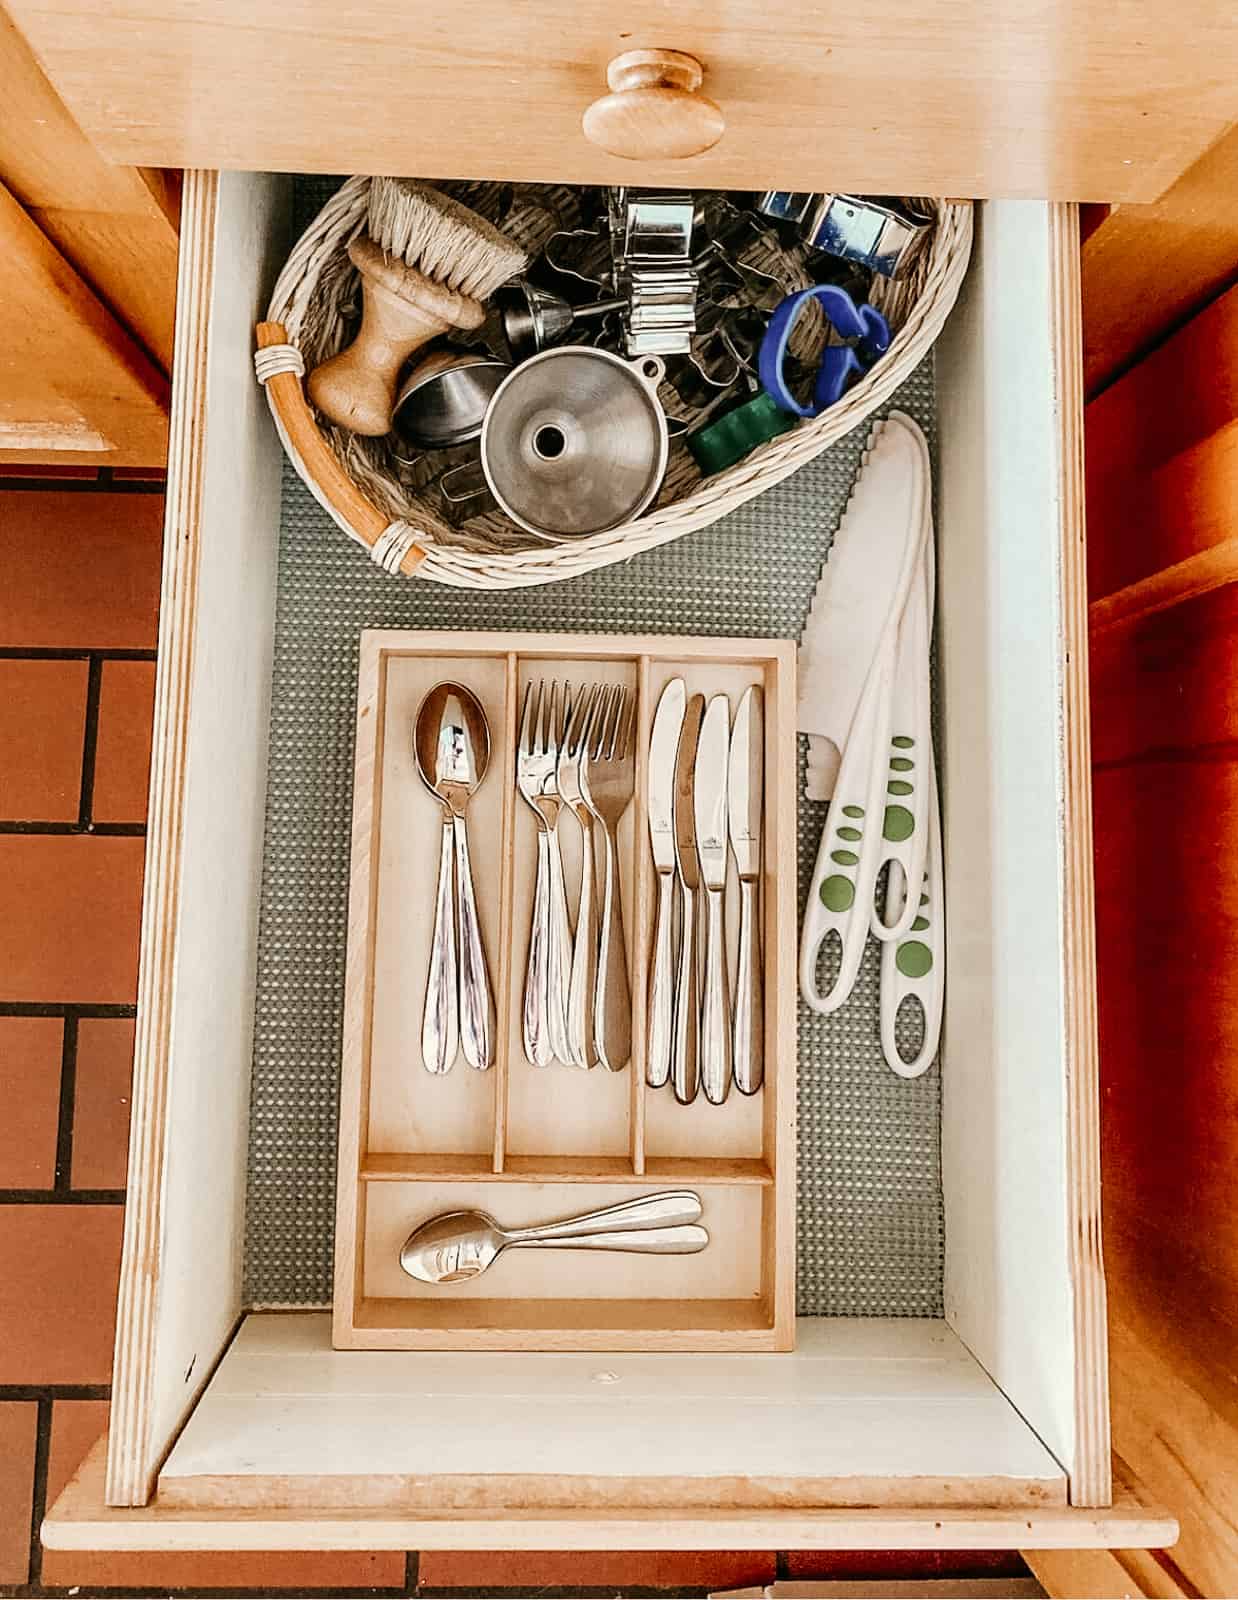 Kid's kitchen tools in drawer organizers for learning how to cook